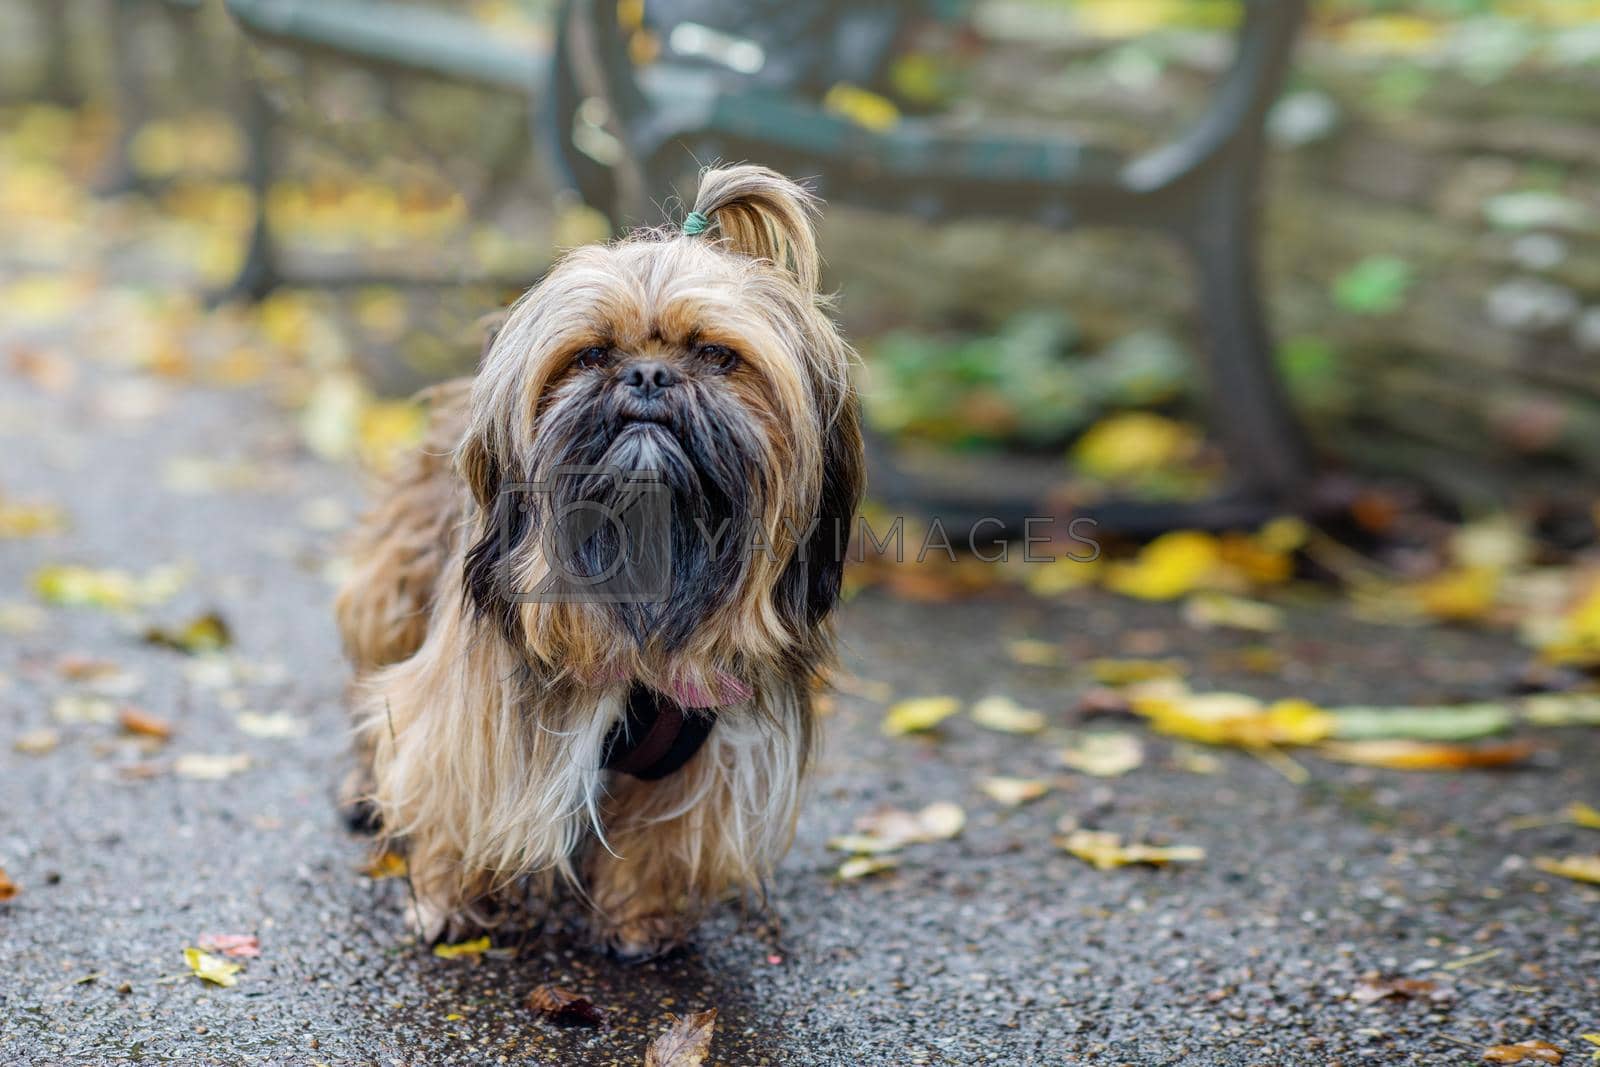 Funny Shih-tzu out for a walk in Autumn cheely day